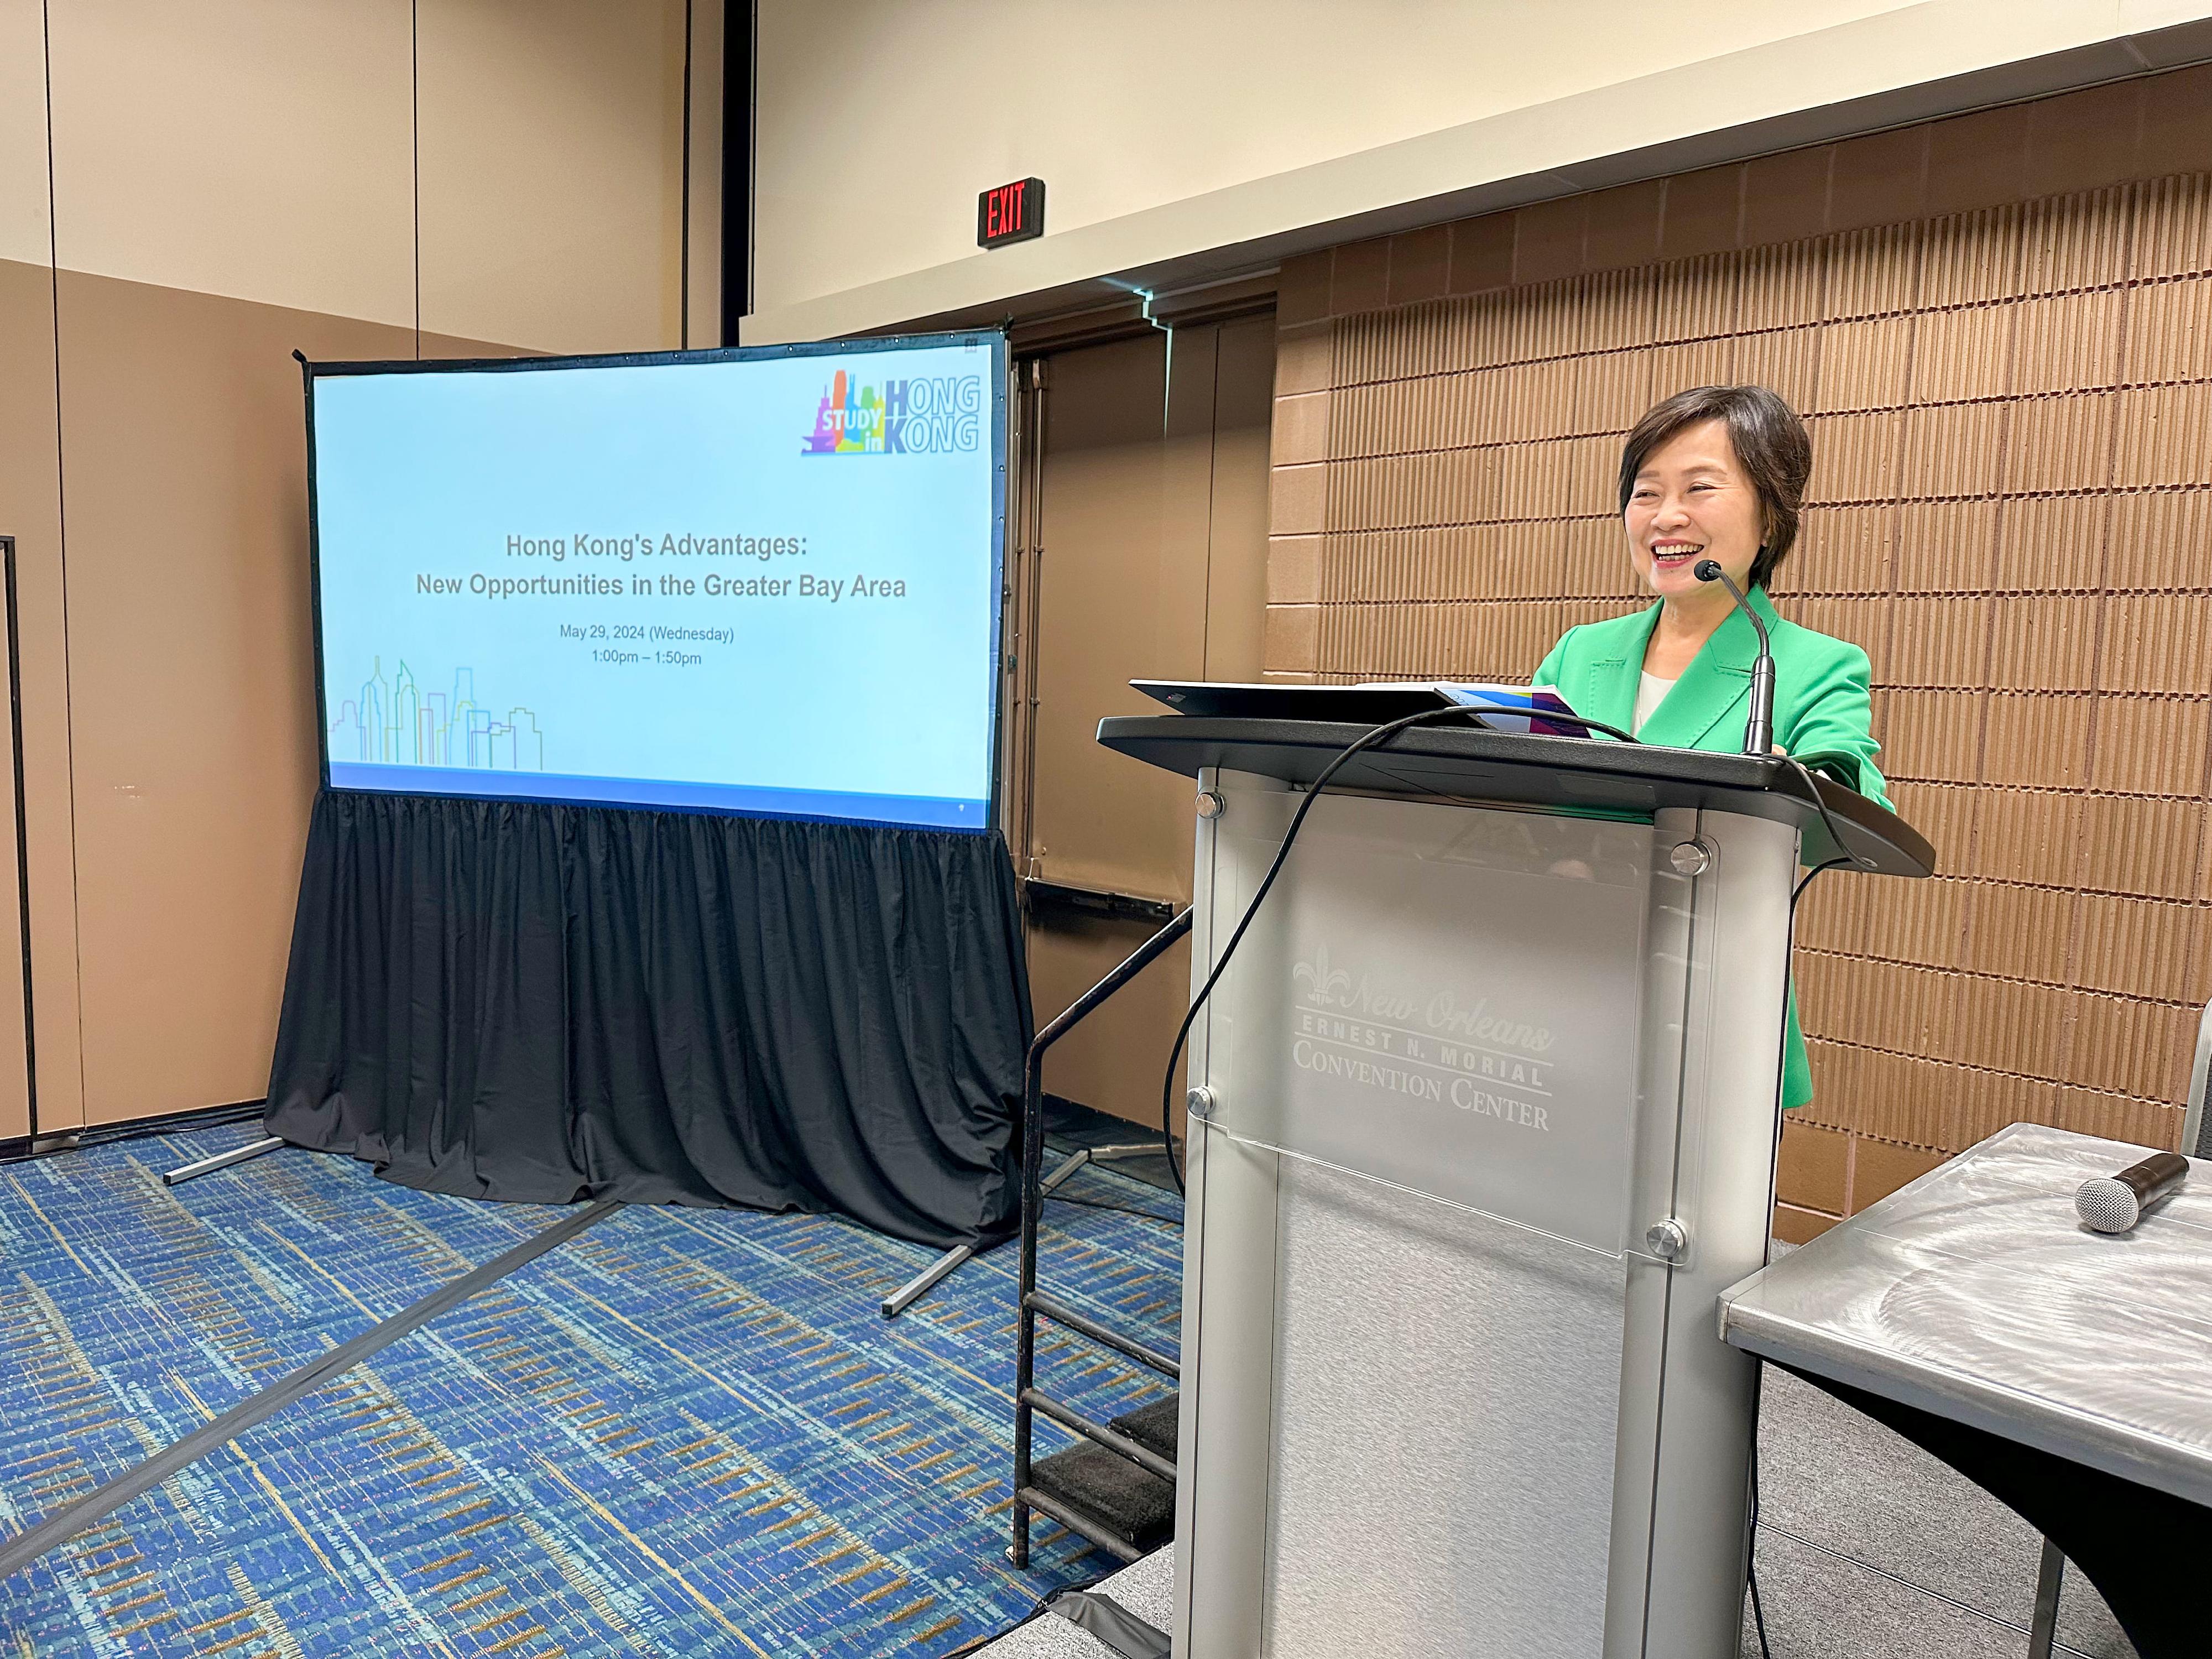 The Secretary for Education, Dr Choi Yuk-lin, delivered a speech on "Study in Hong Kong" in a seminar of the NAFSA Annual Conference & Expo in New Orleans, the United States, on May 29 (New Orleans time).